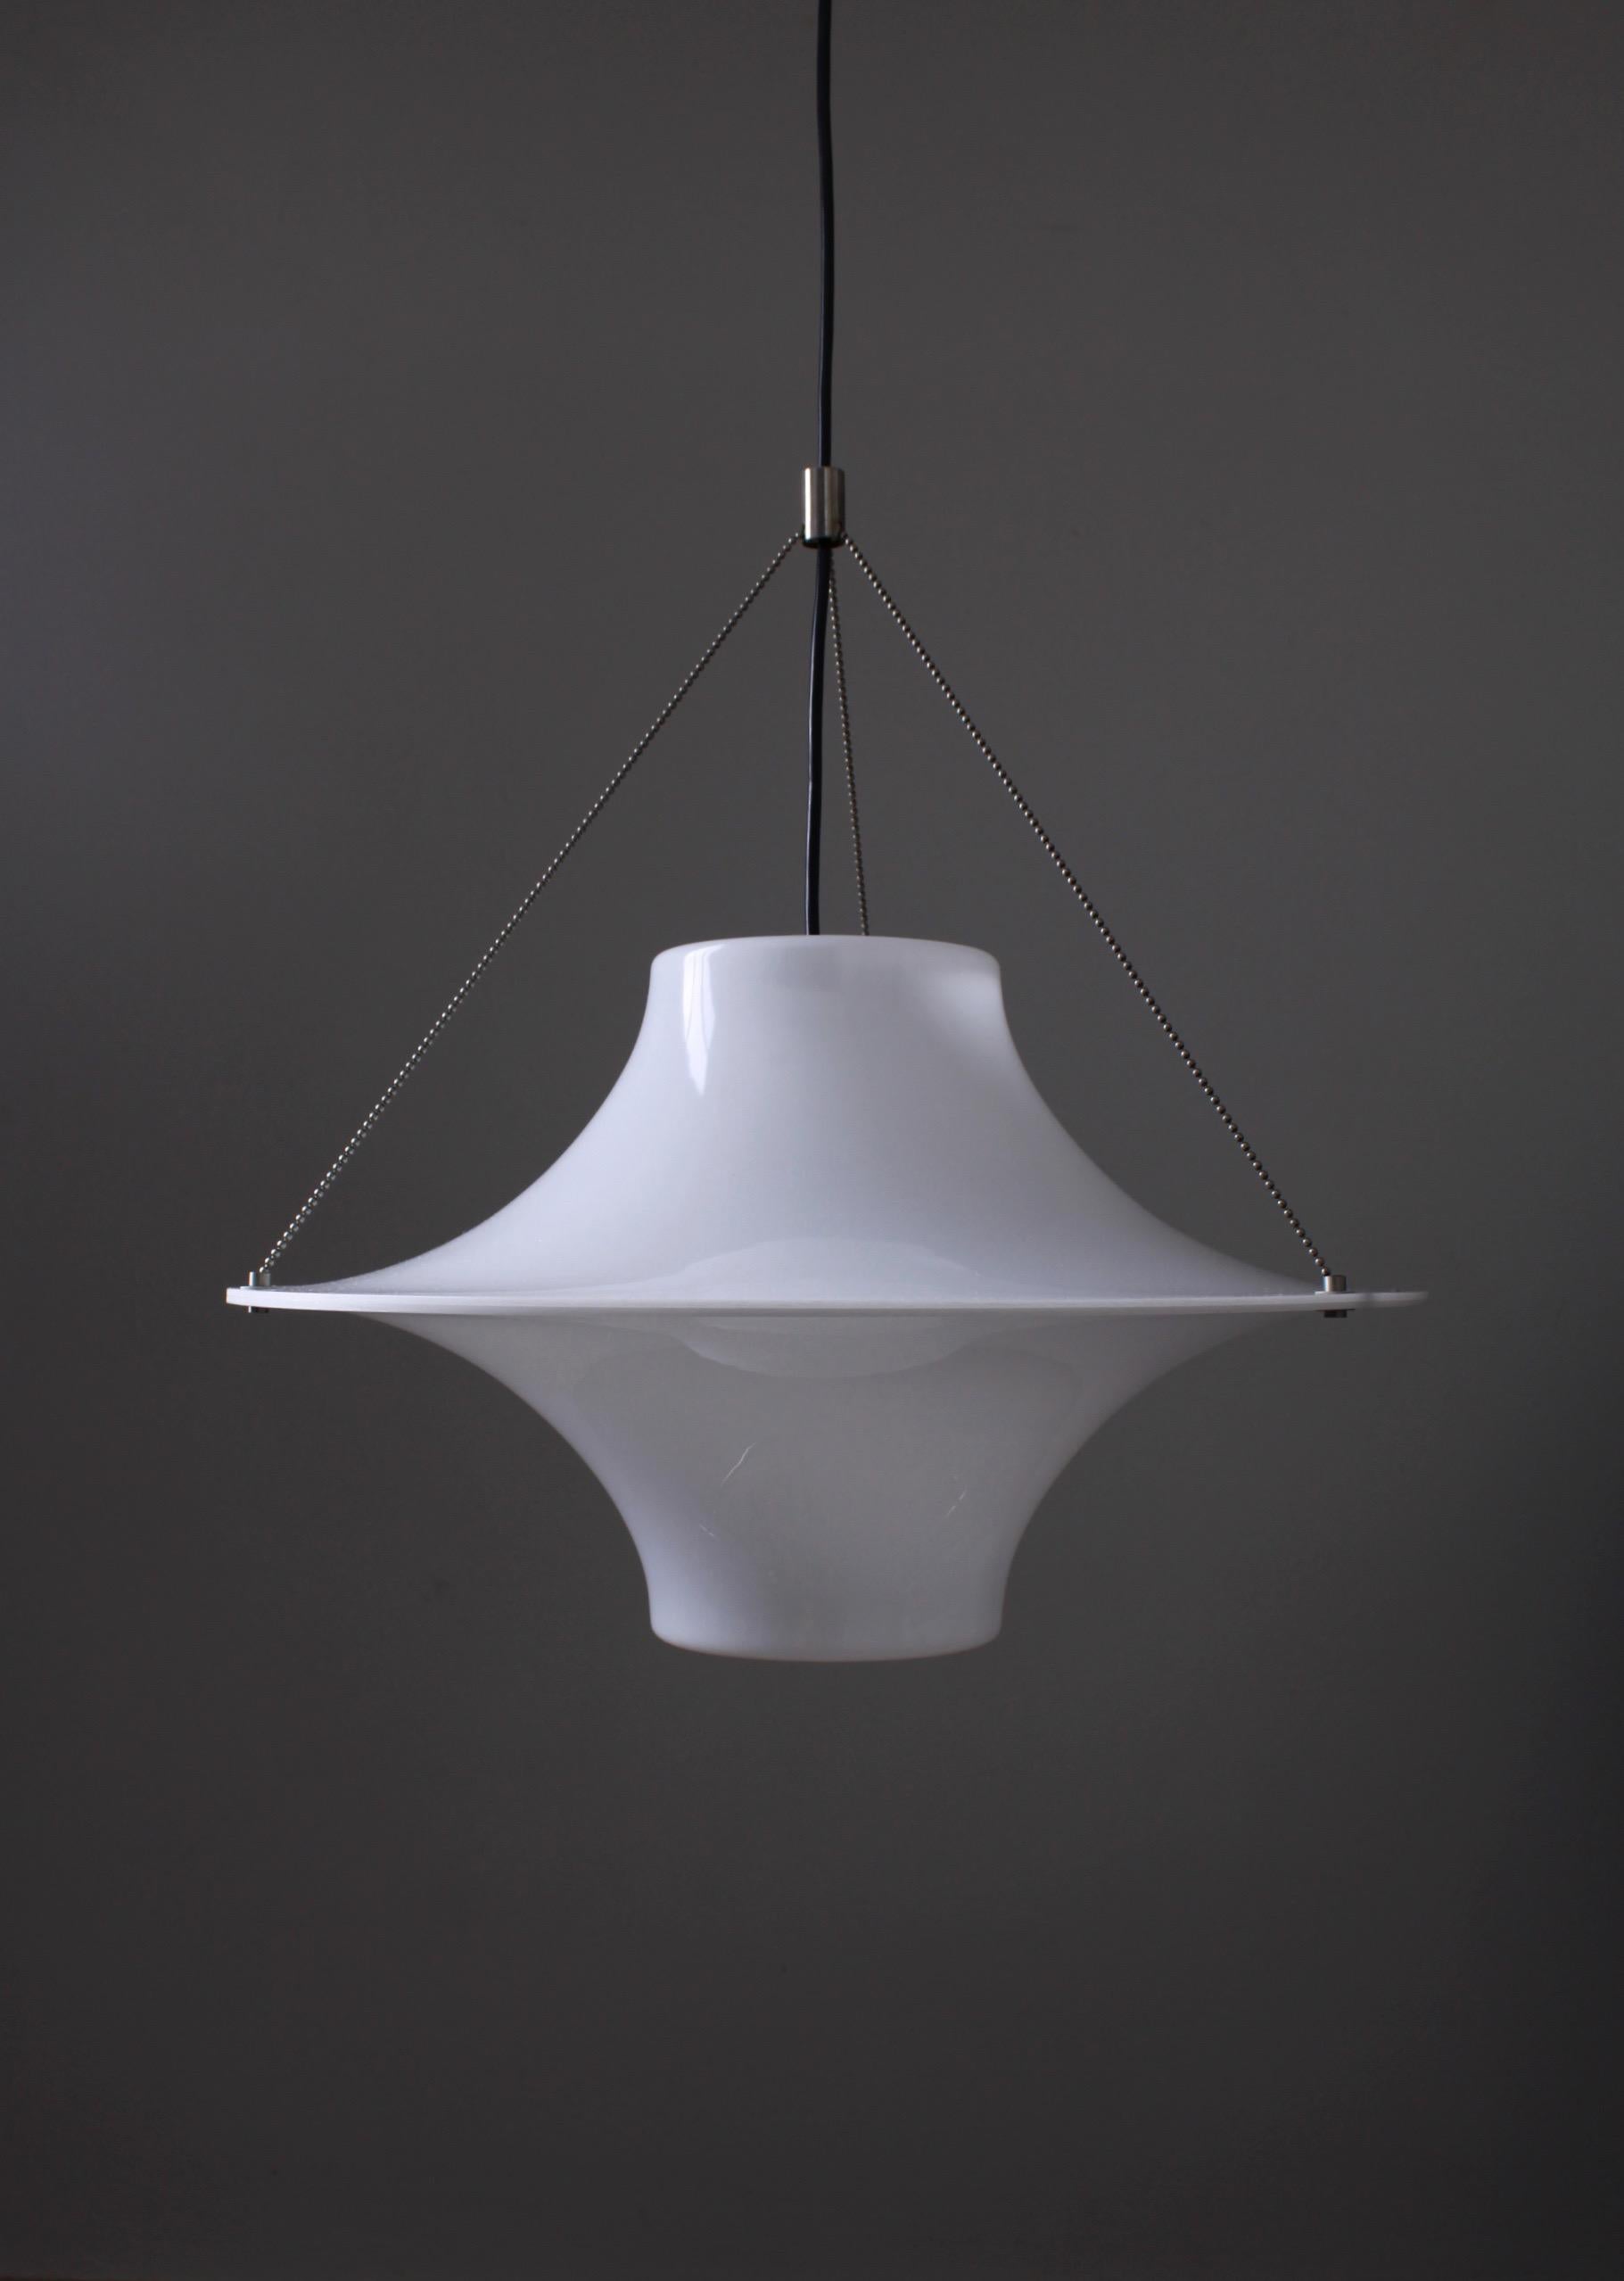 Skyflyer (Lokki) pendant lamp designed by Yki Nummi for Stockmann-Orno in 1960. Yki Nummi designed multiple plexiglass lamps in the 1950s and 1960s. This is Yki Nummi’s most known design and this lamp has won several international awards. The lamp